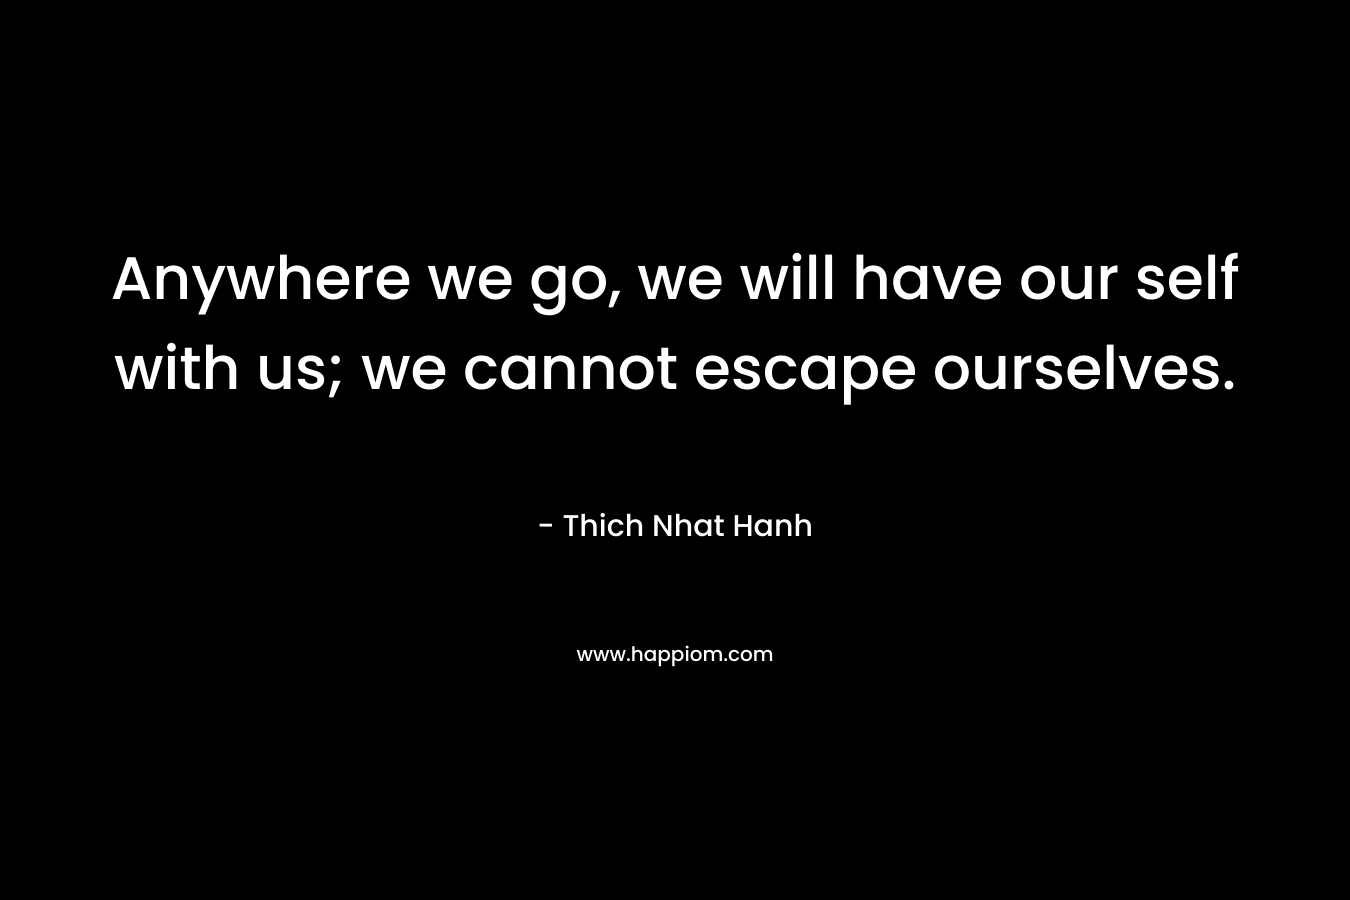 Anywhere we go, we will have our self with us; we cannot escape ourselves.